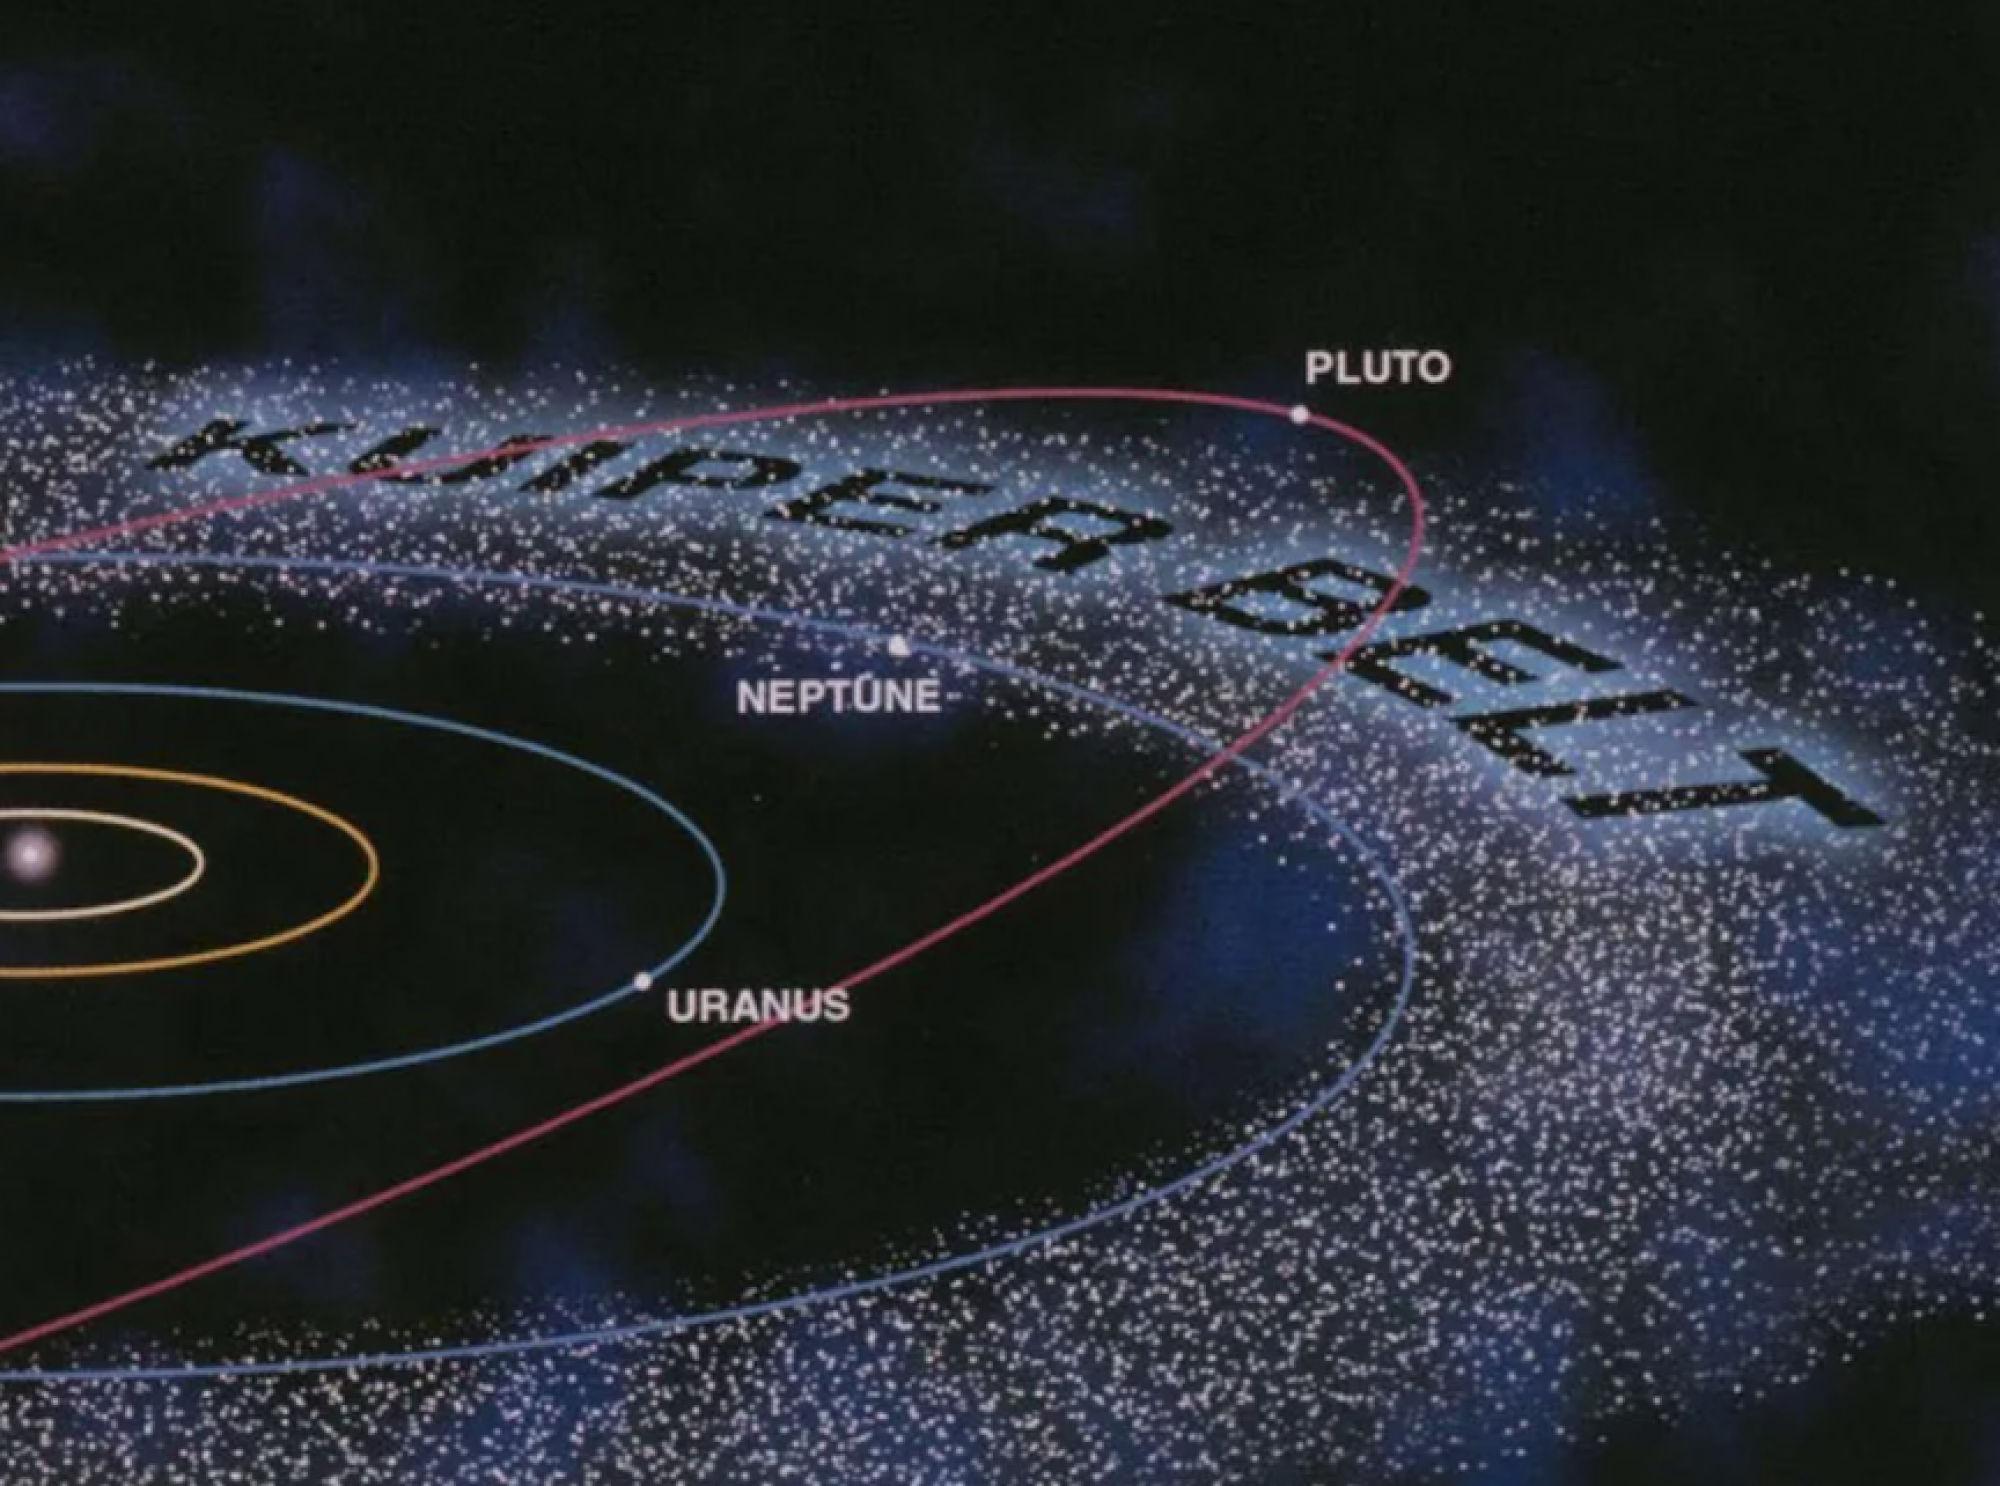 A graphic showing the Kuiper Belt beyond the orbit of Neptune in our solar system.